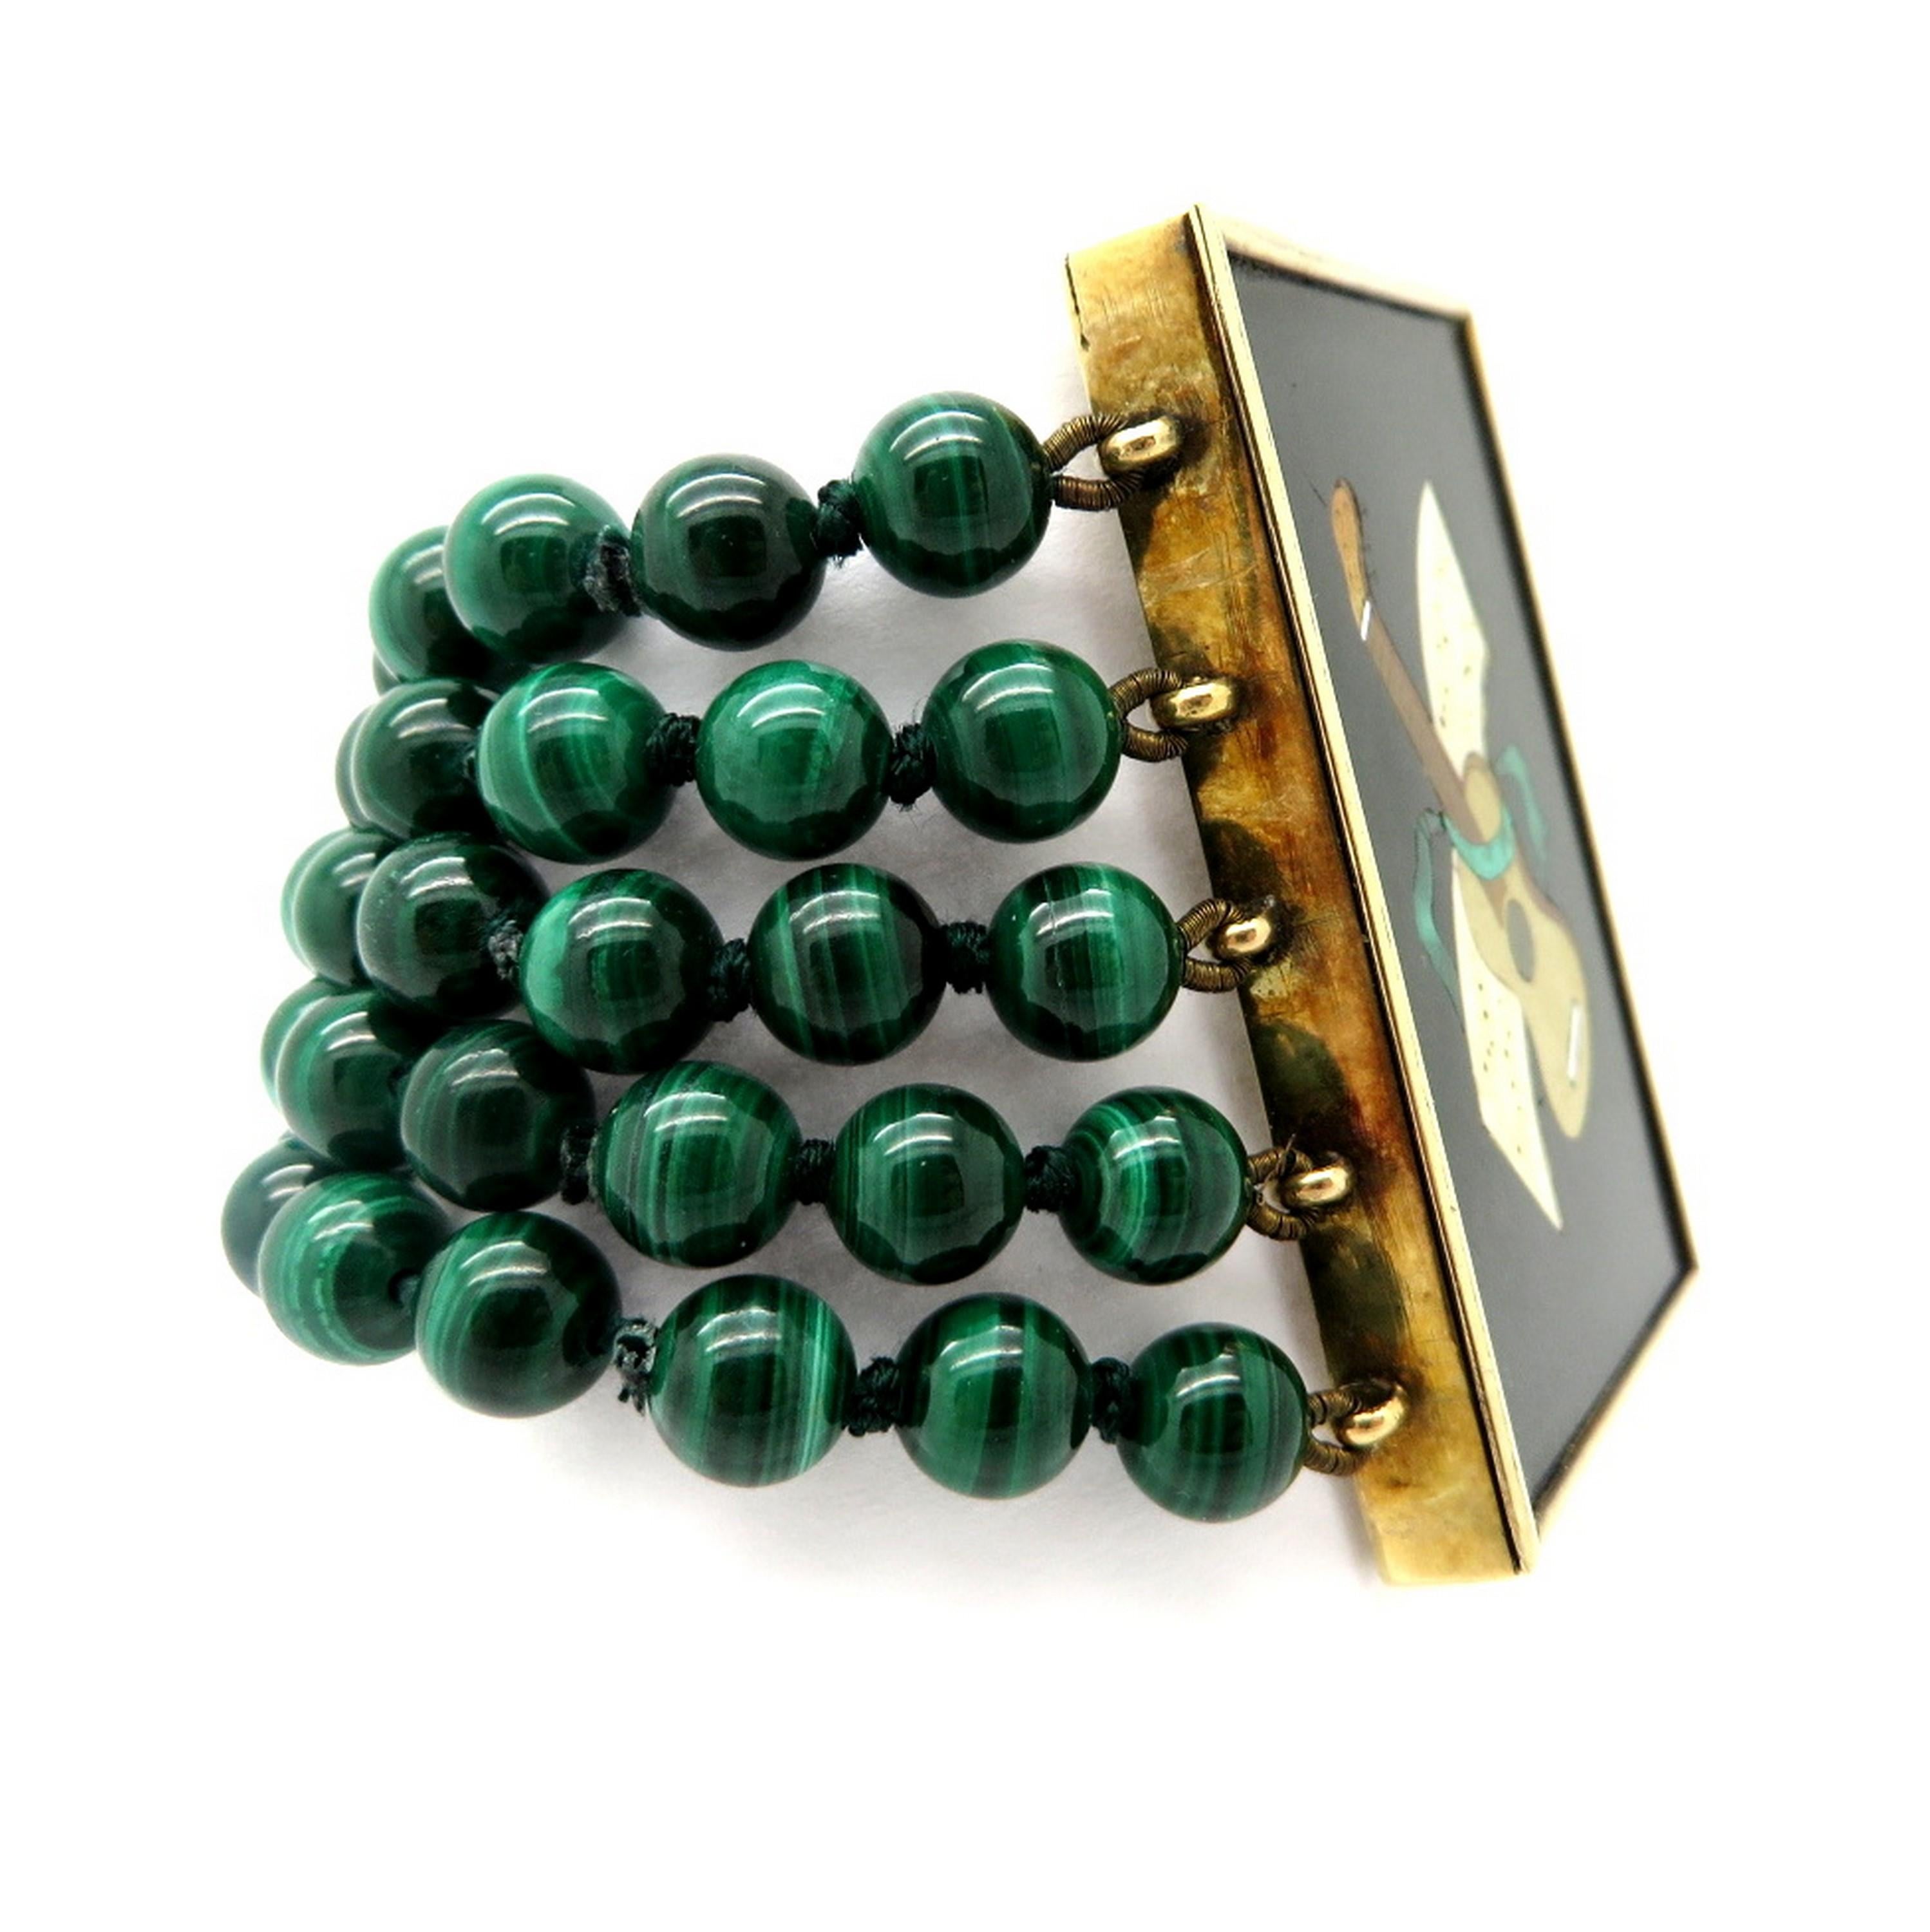 Estate 14K yellow gold one-of-a-kind malachite guitar fashion bracelet. Featuring five rows of American cut round beaded malachite gemstones, each measuring 6.5 to 6.7 mm. The bracelet features an artistic mosaic inlay link featuring a guitar with a